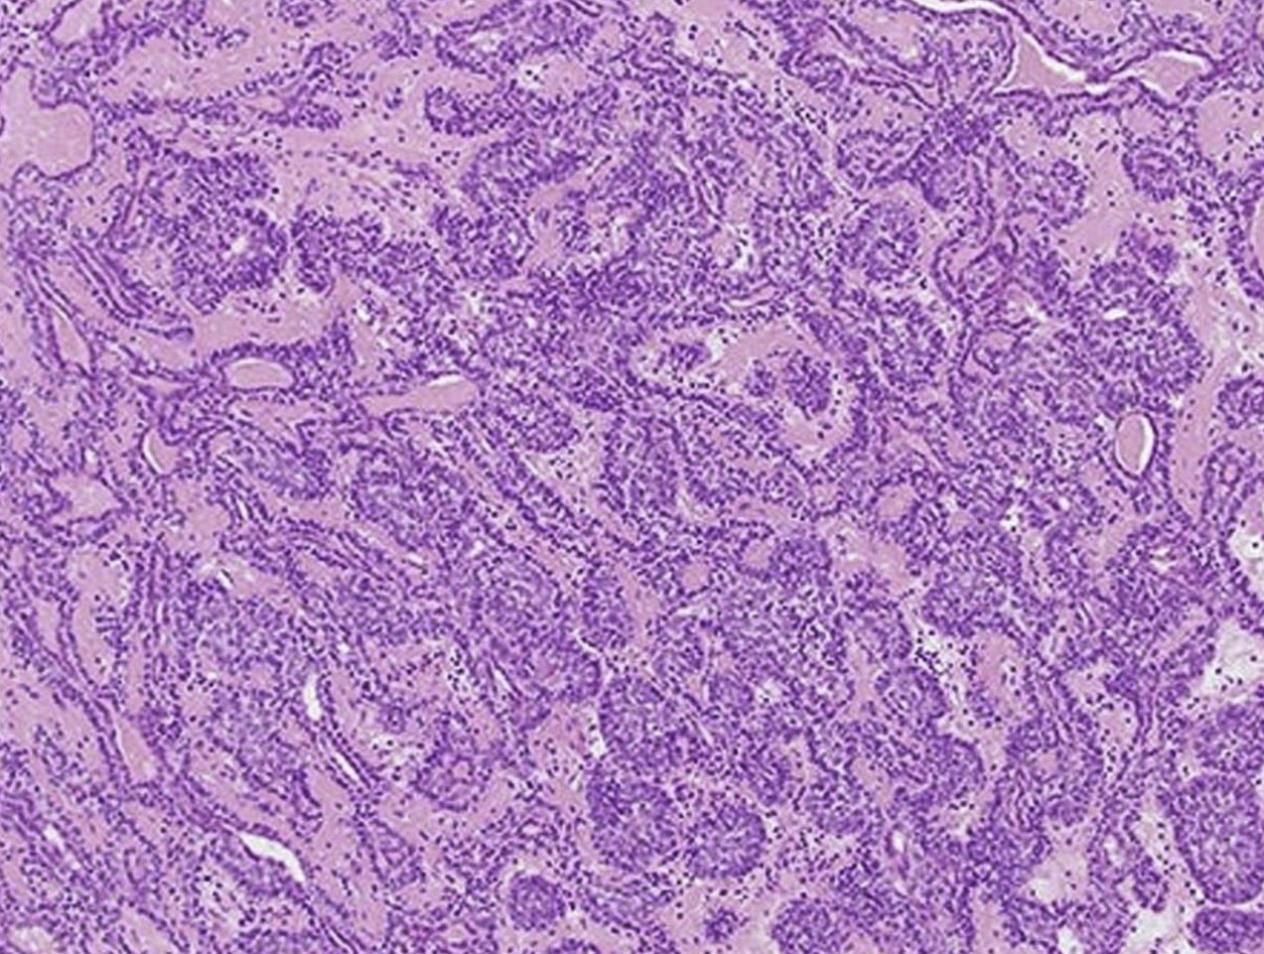 Spiradenoma presenting as a dermal nodule in chest of a 55-year old female patient.